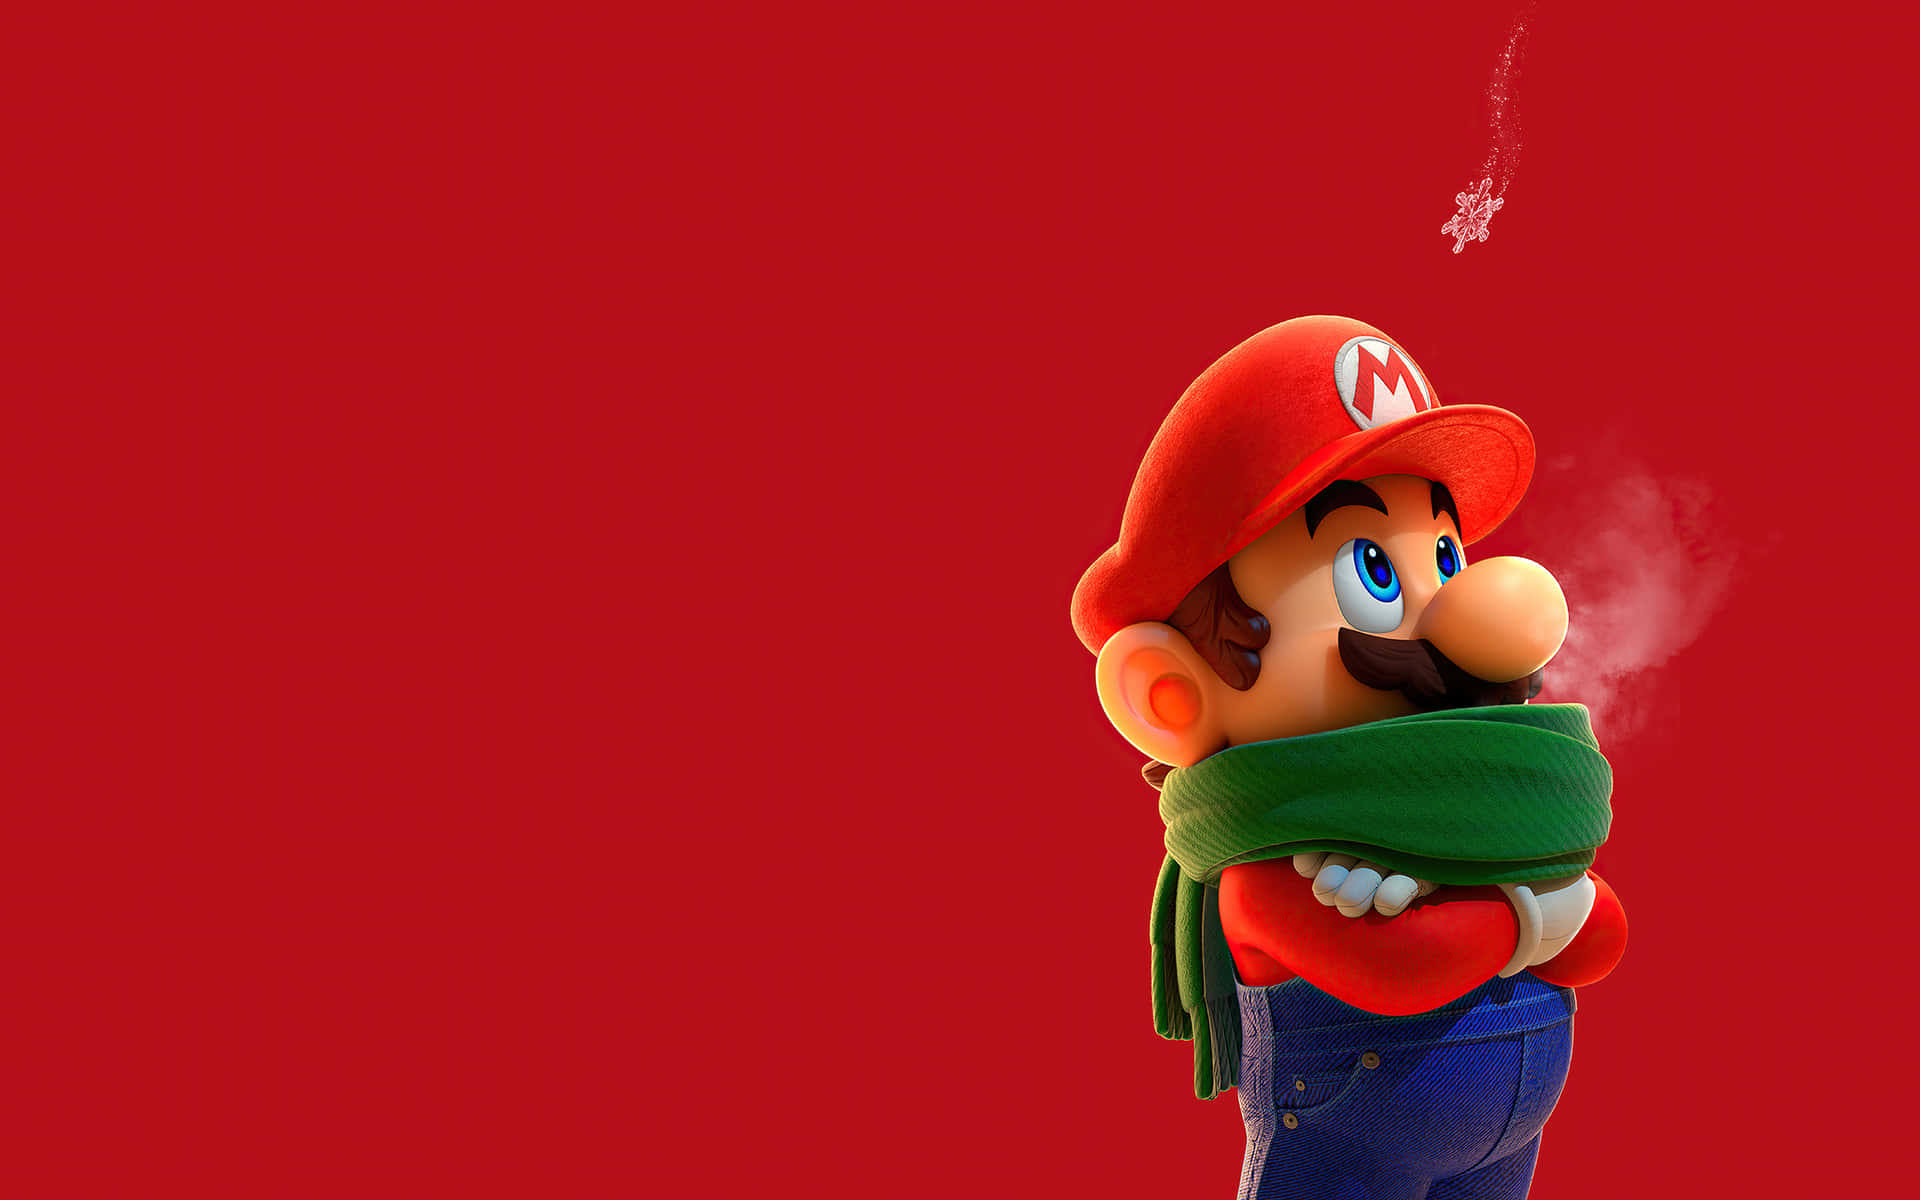 Mario, the beloved plumber, jumps in full excitement!